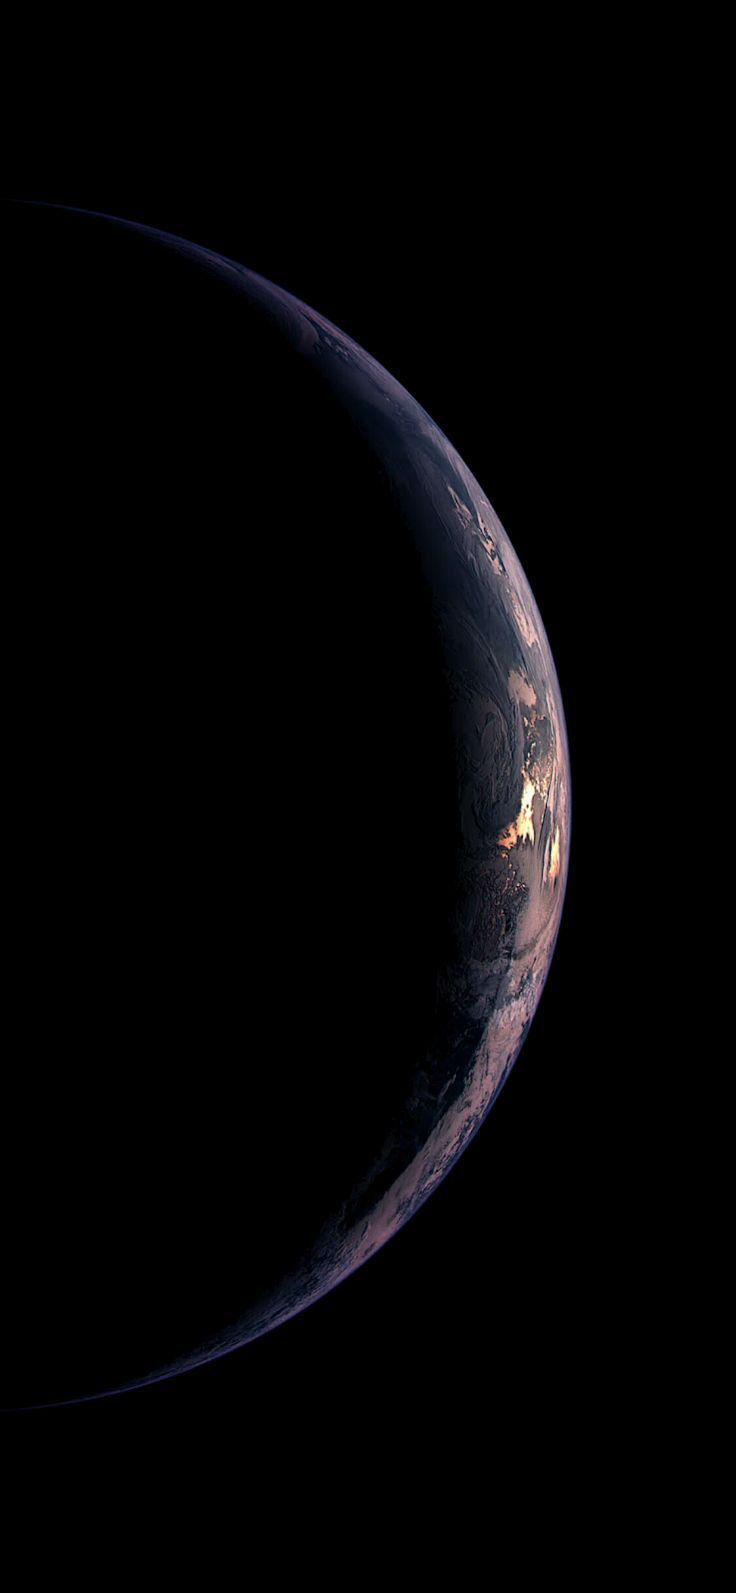 Earth For iPhone X Xs Amoled Display